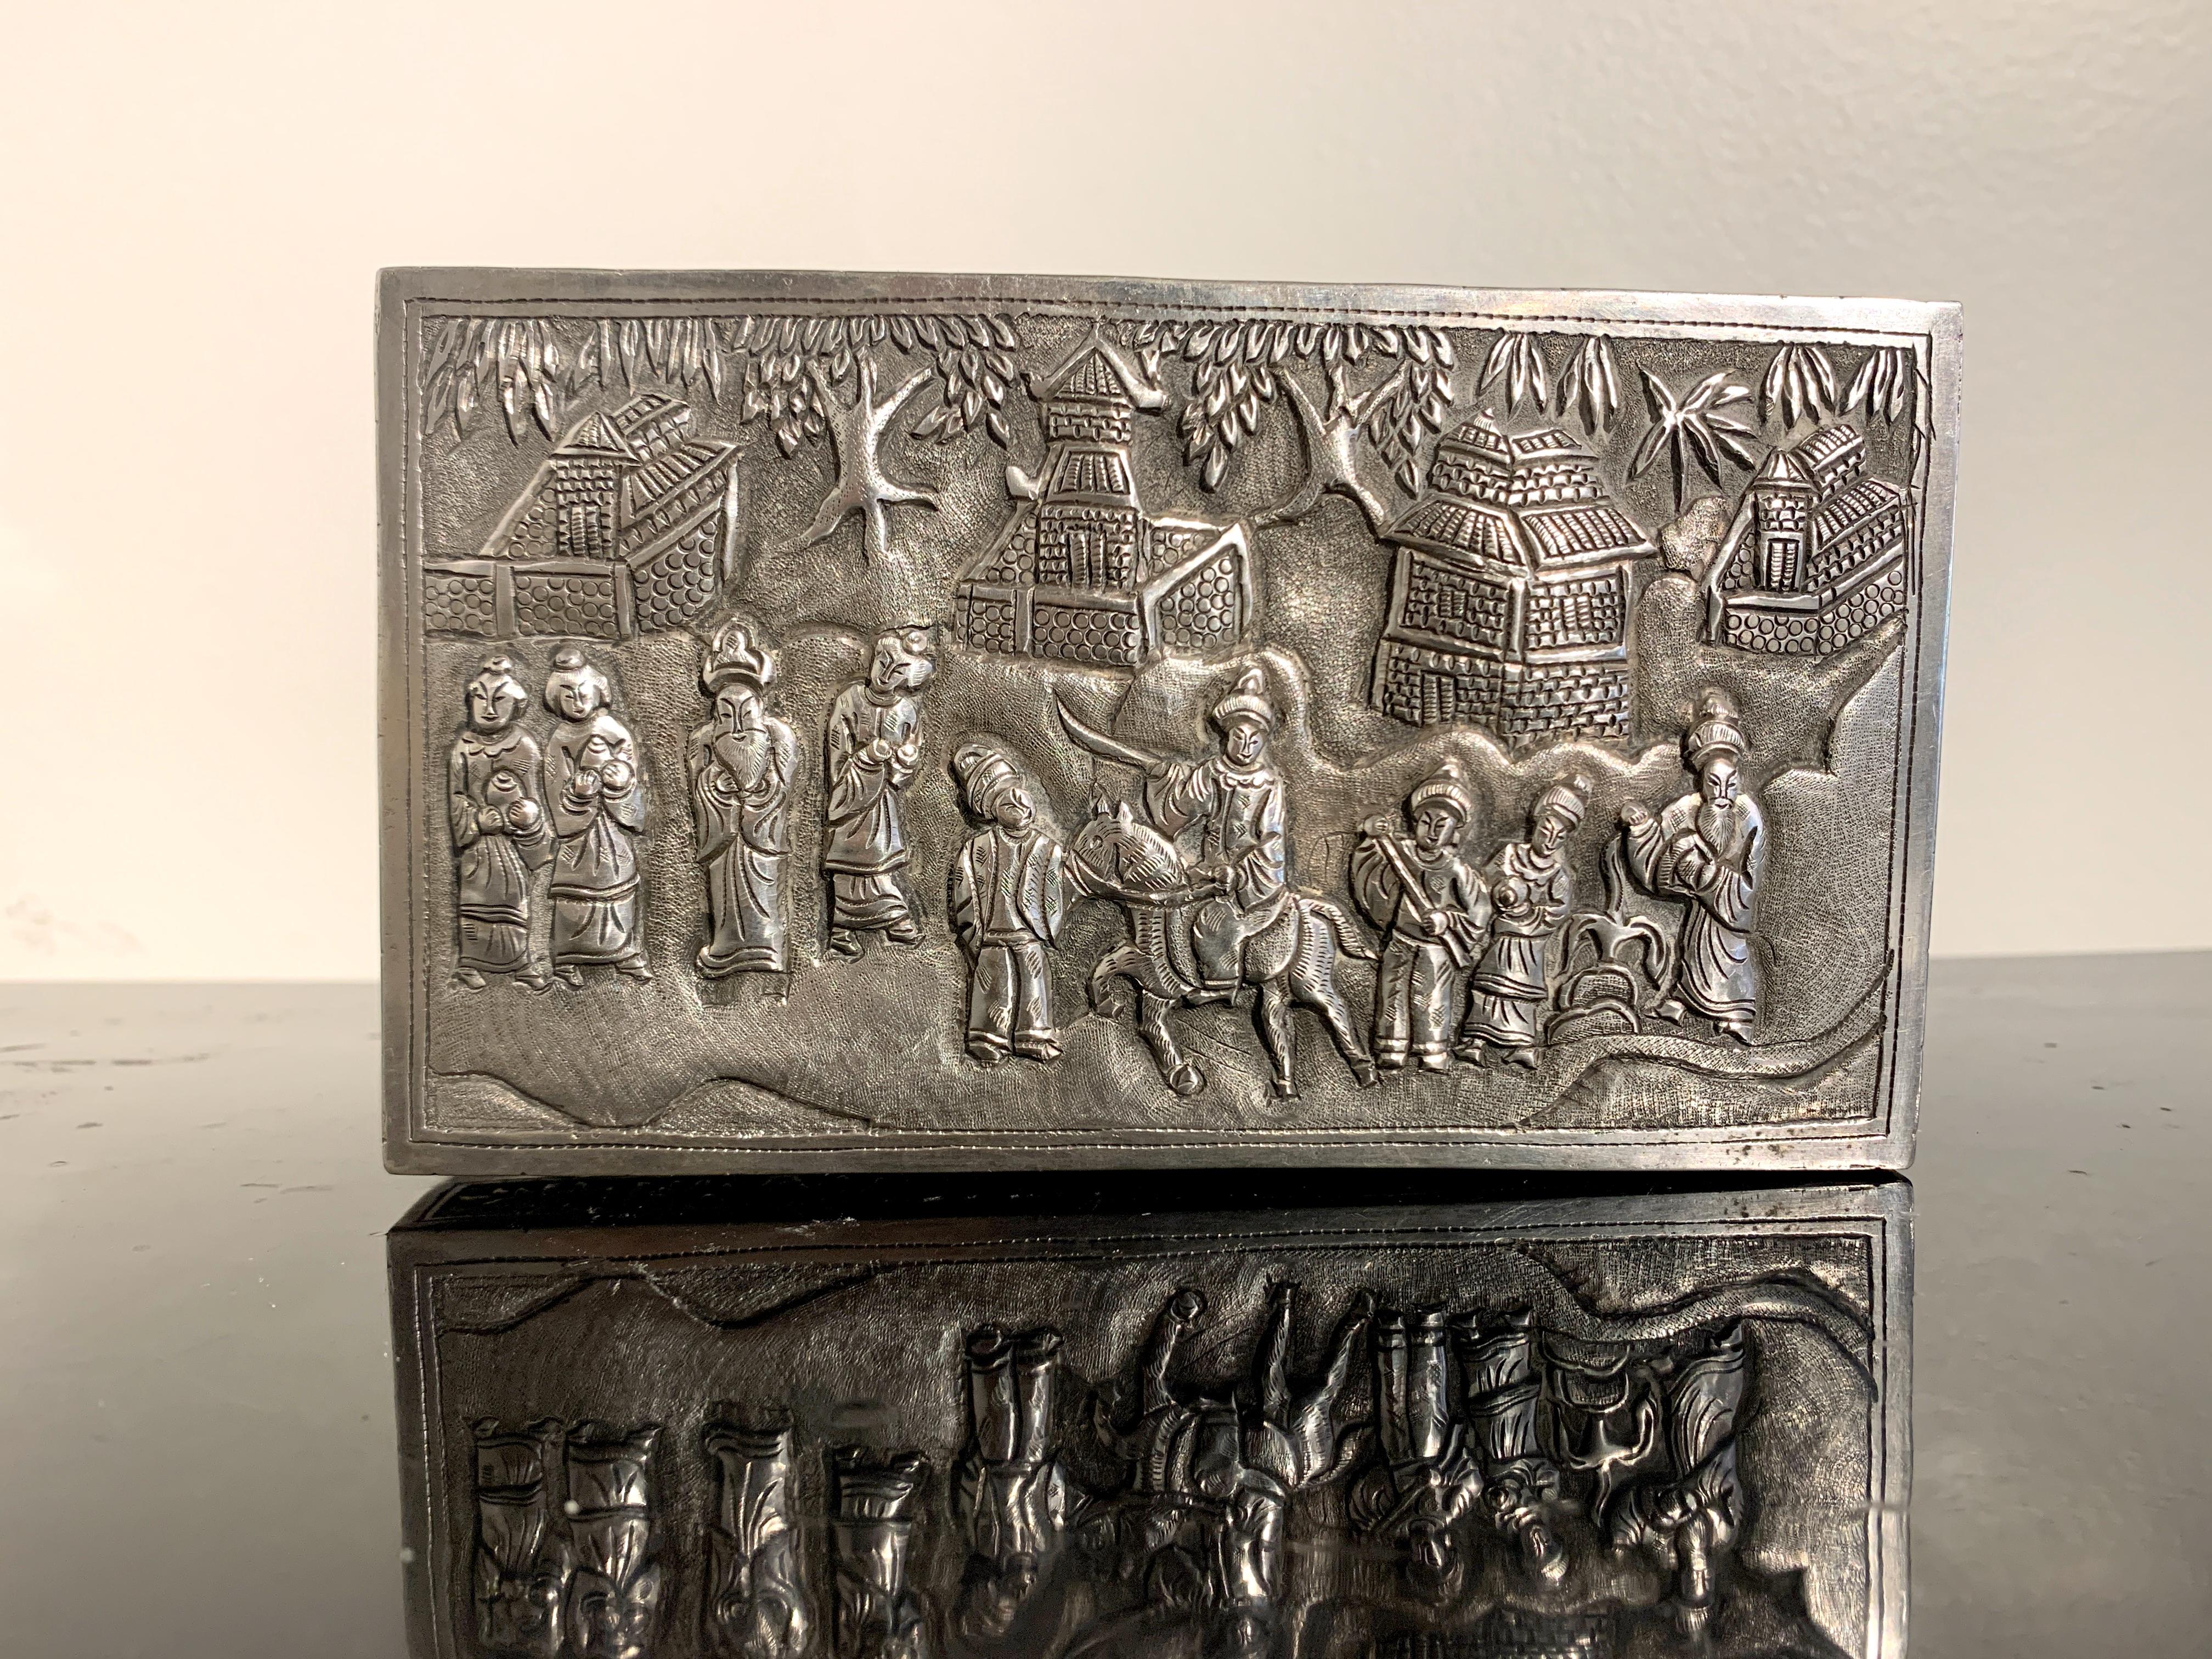 A fine late Qing or early Republic Period Chinese silver repoussé box featuring a scene possibly from the Romance of the Three Kingdoms, very early 20th century, China. 

The rectangular box with a hinged lid and decorated all over in high and low